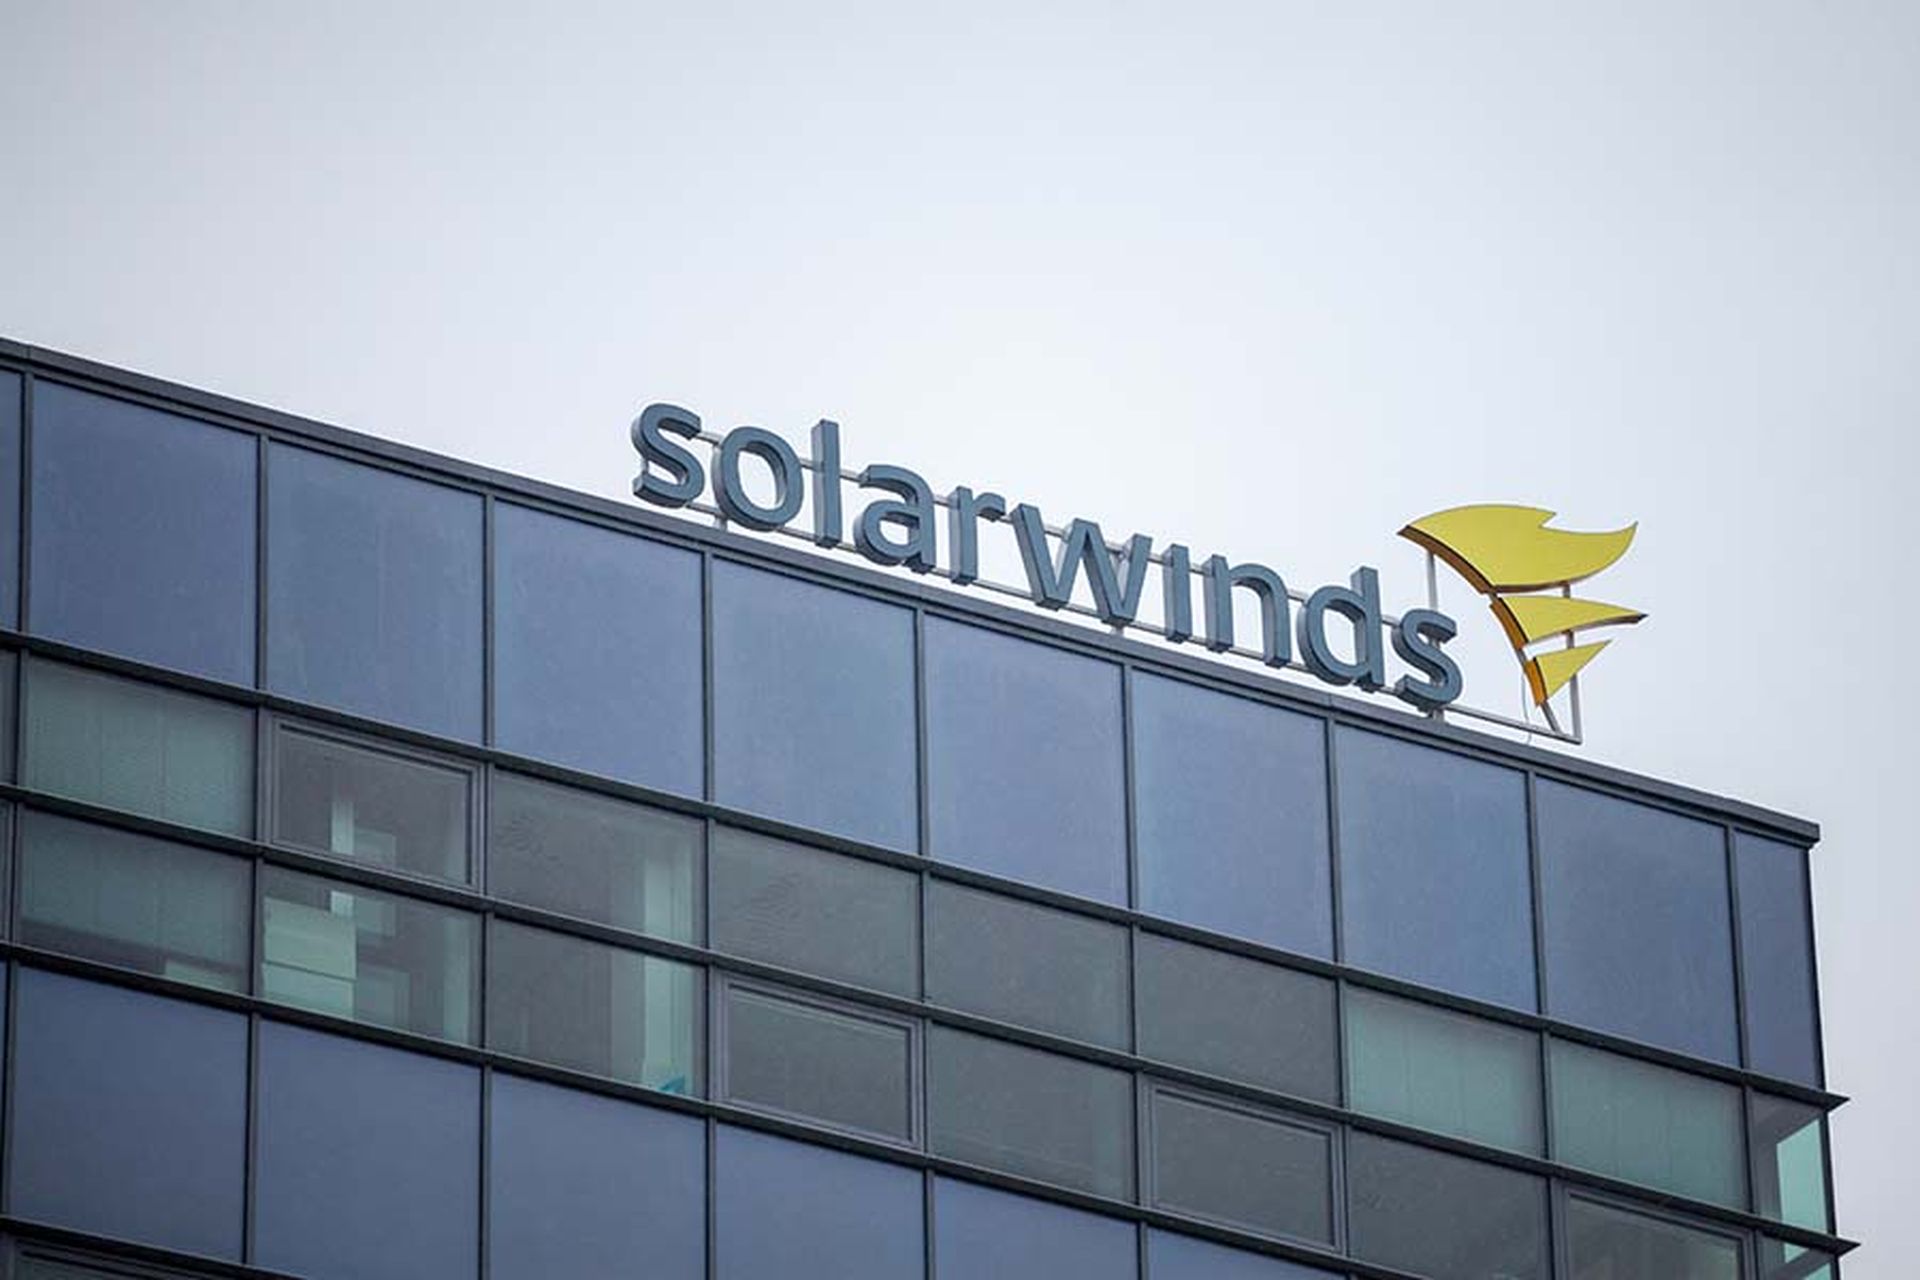 SolarWinds CISO and CFO are focus of SEC’s Orion investigation